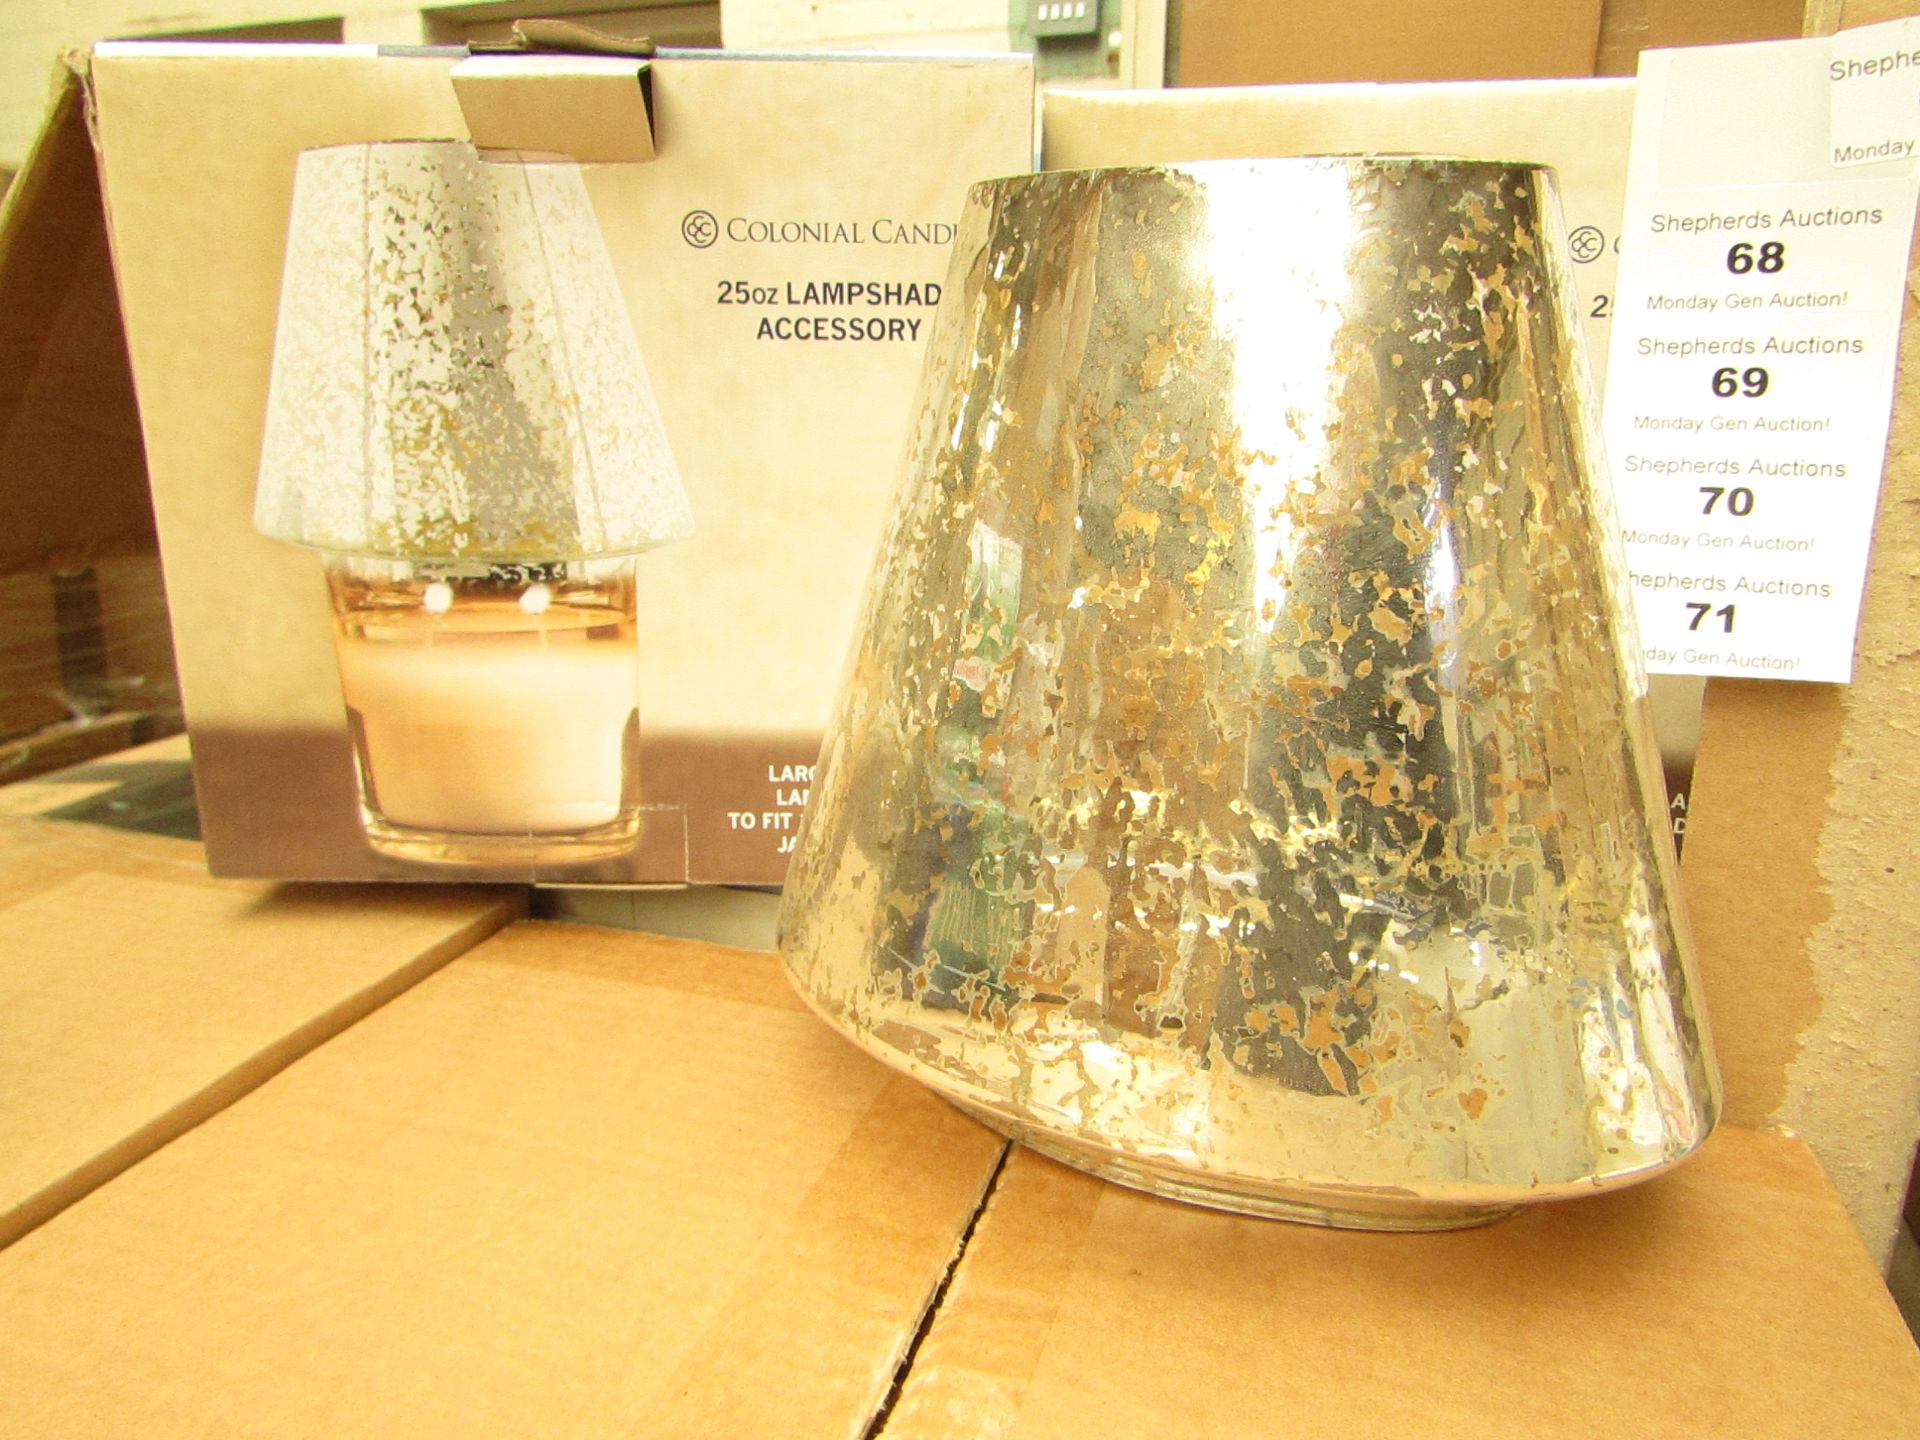 2x Colonial 25oz lampshade accessory, both new and boxed,